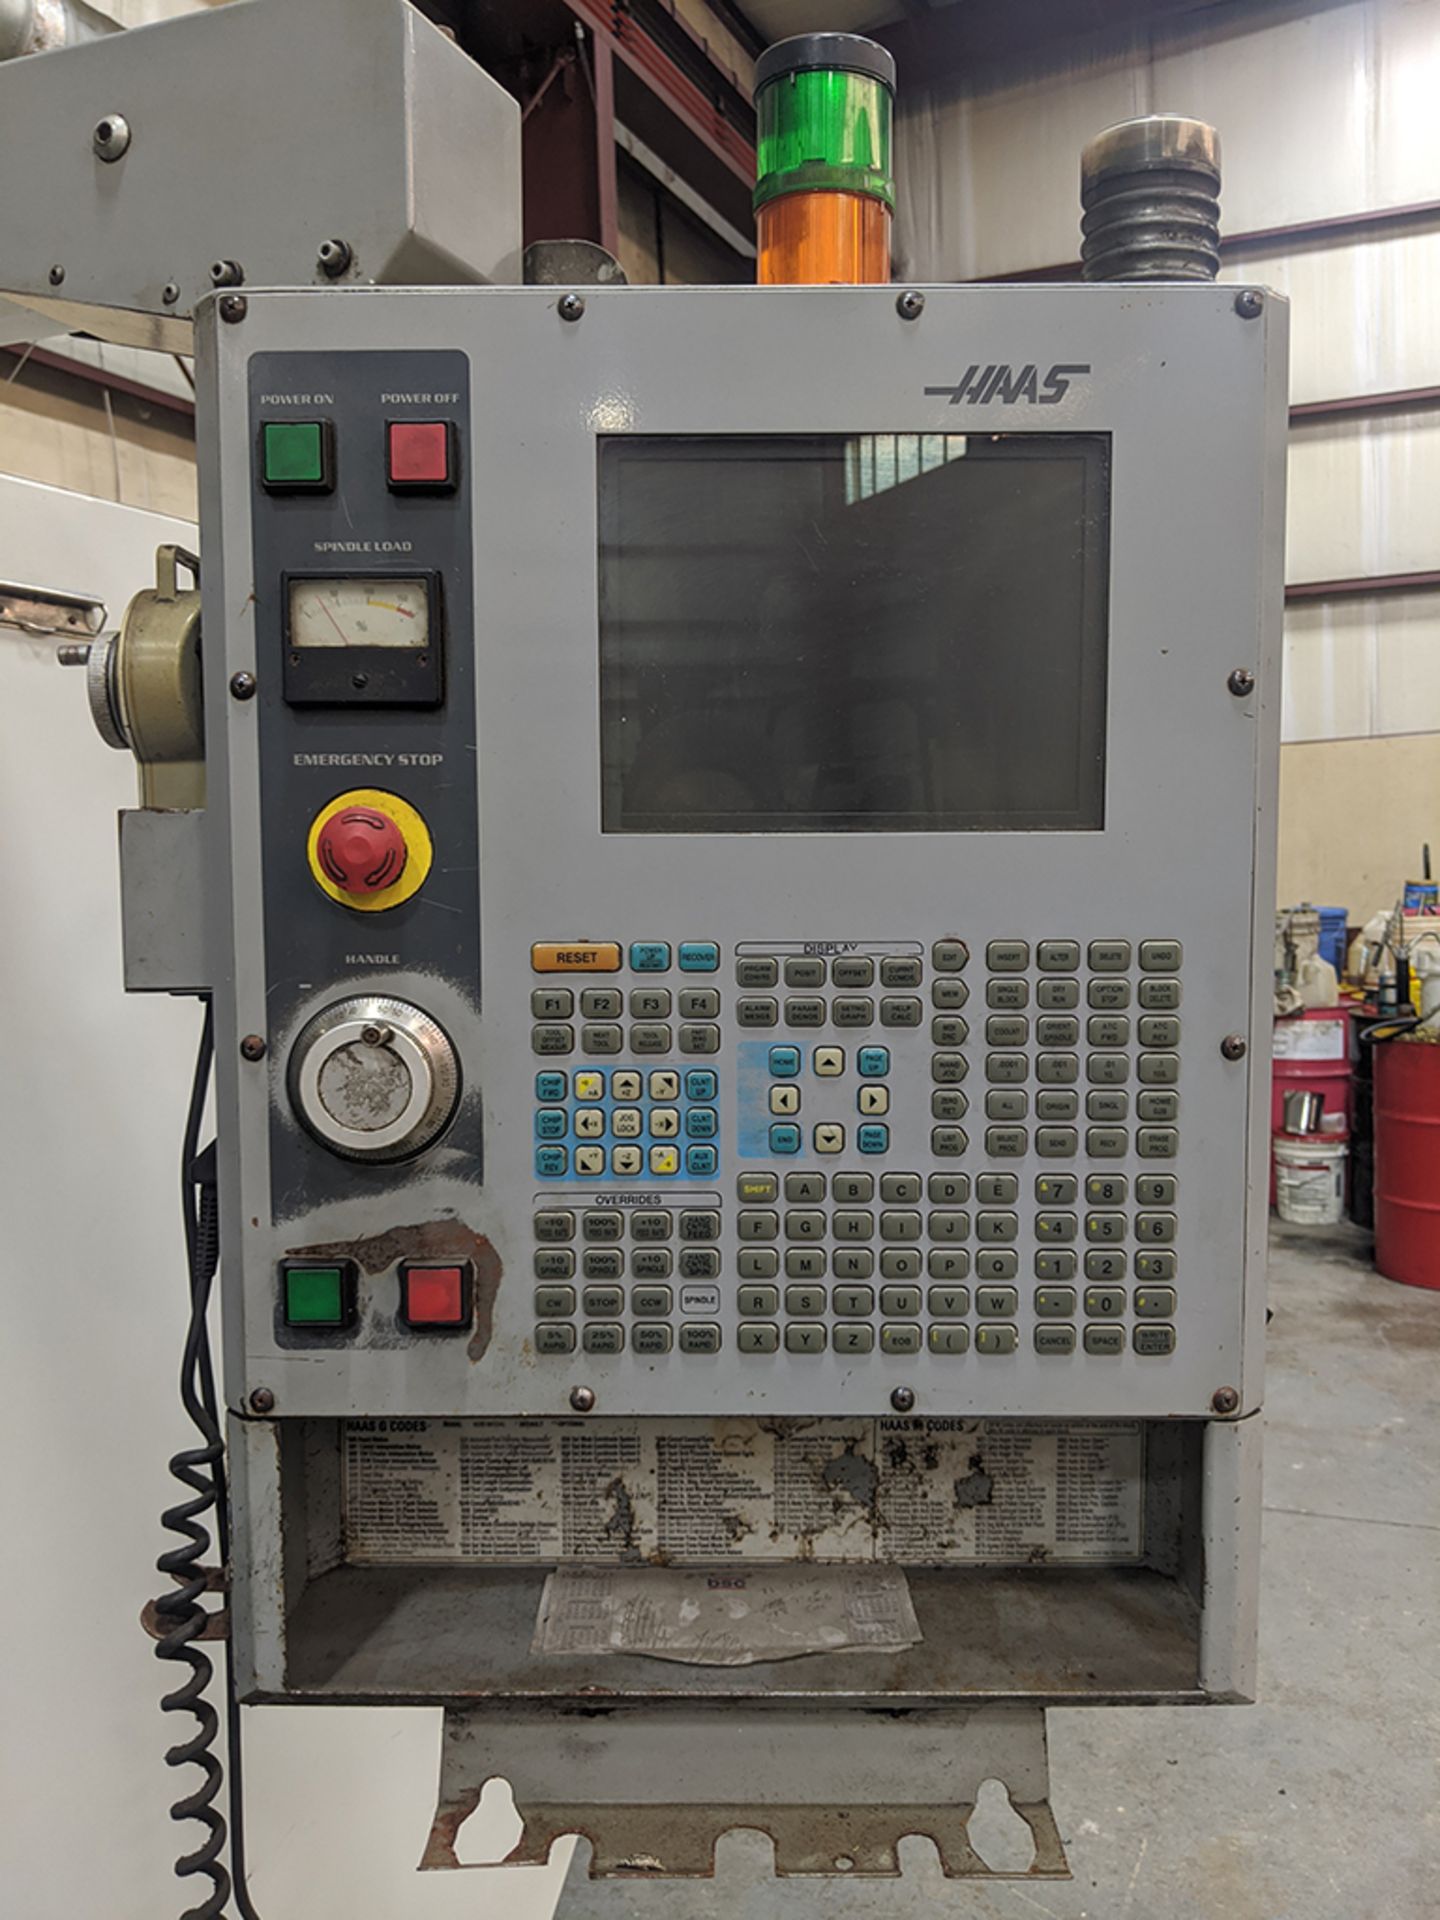 2002 Haas Model VF5/50 CNC Vertical Milling Machine - Image 5 of 10